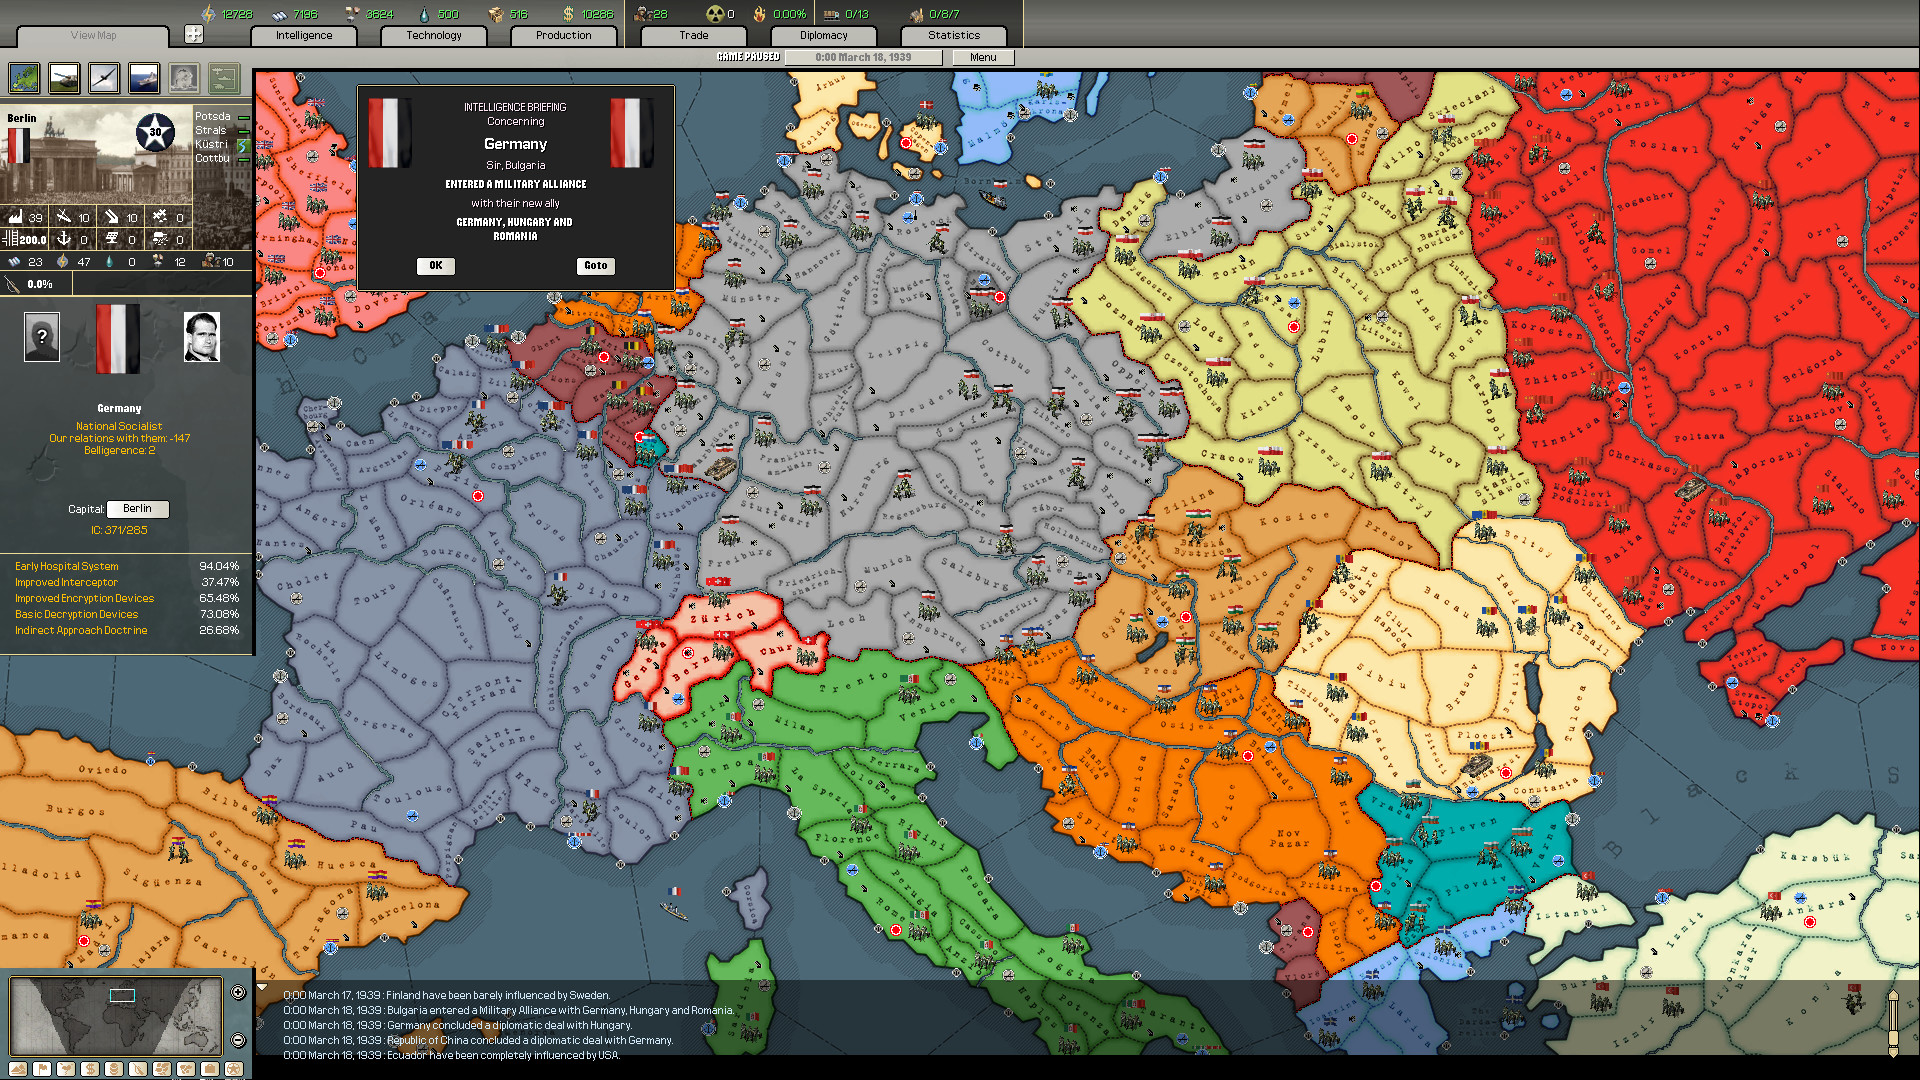 Arsenal of Democracy: A Hearts of Iron Game Featured Screenshot #1